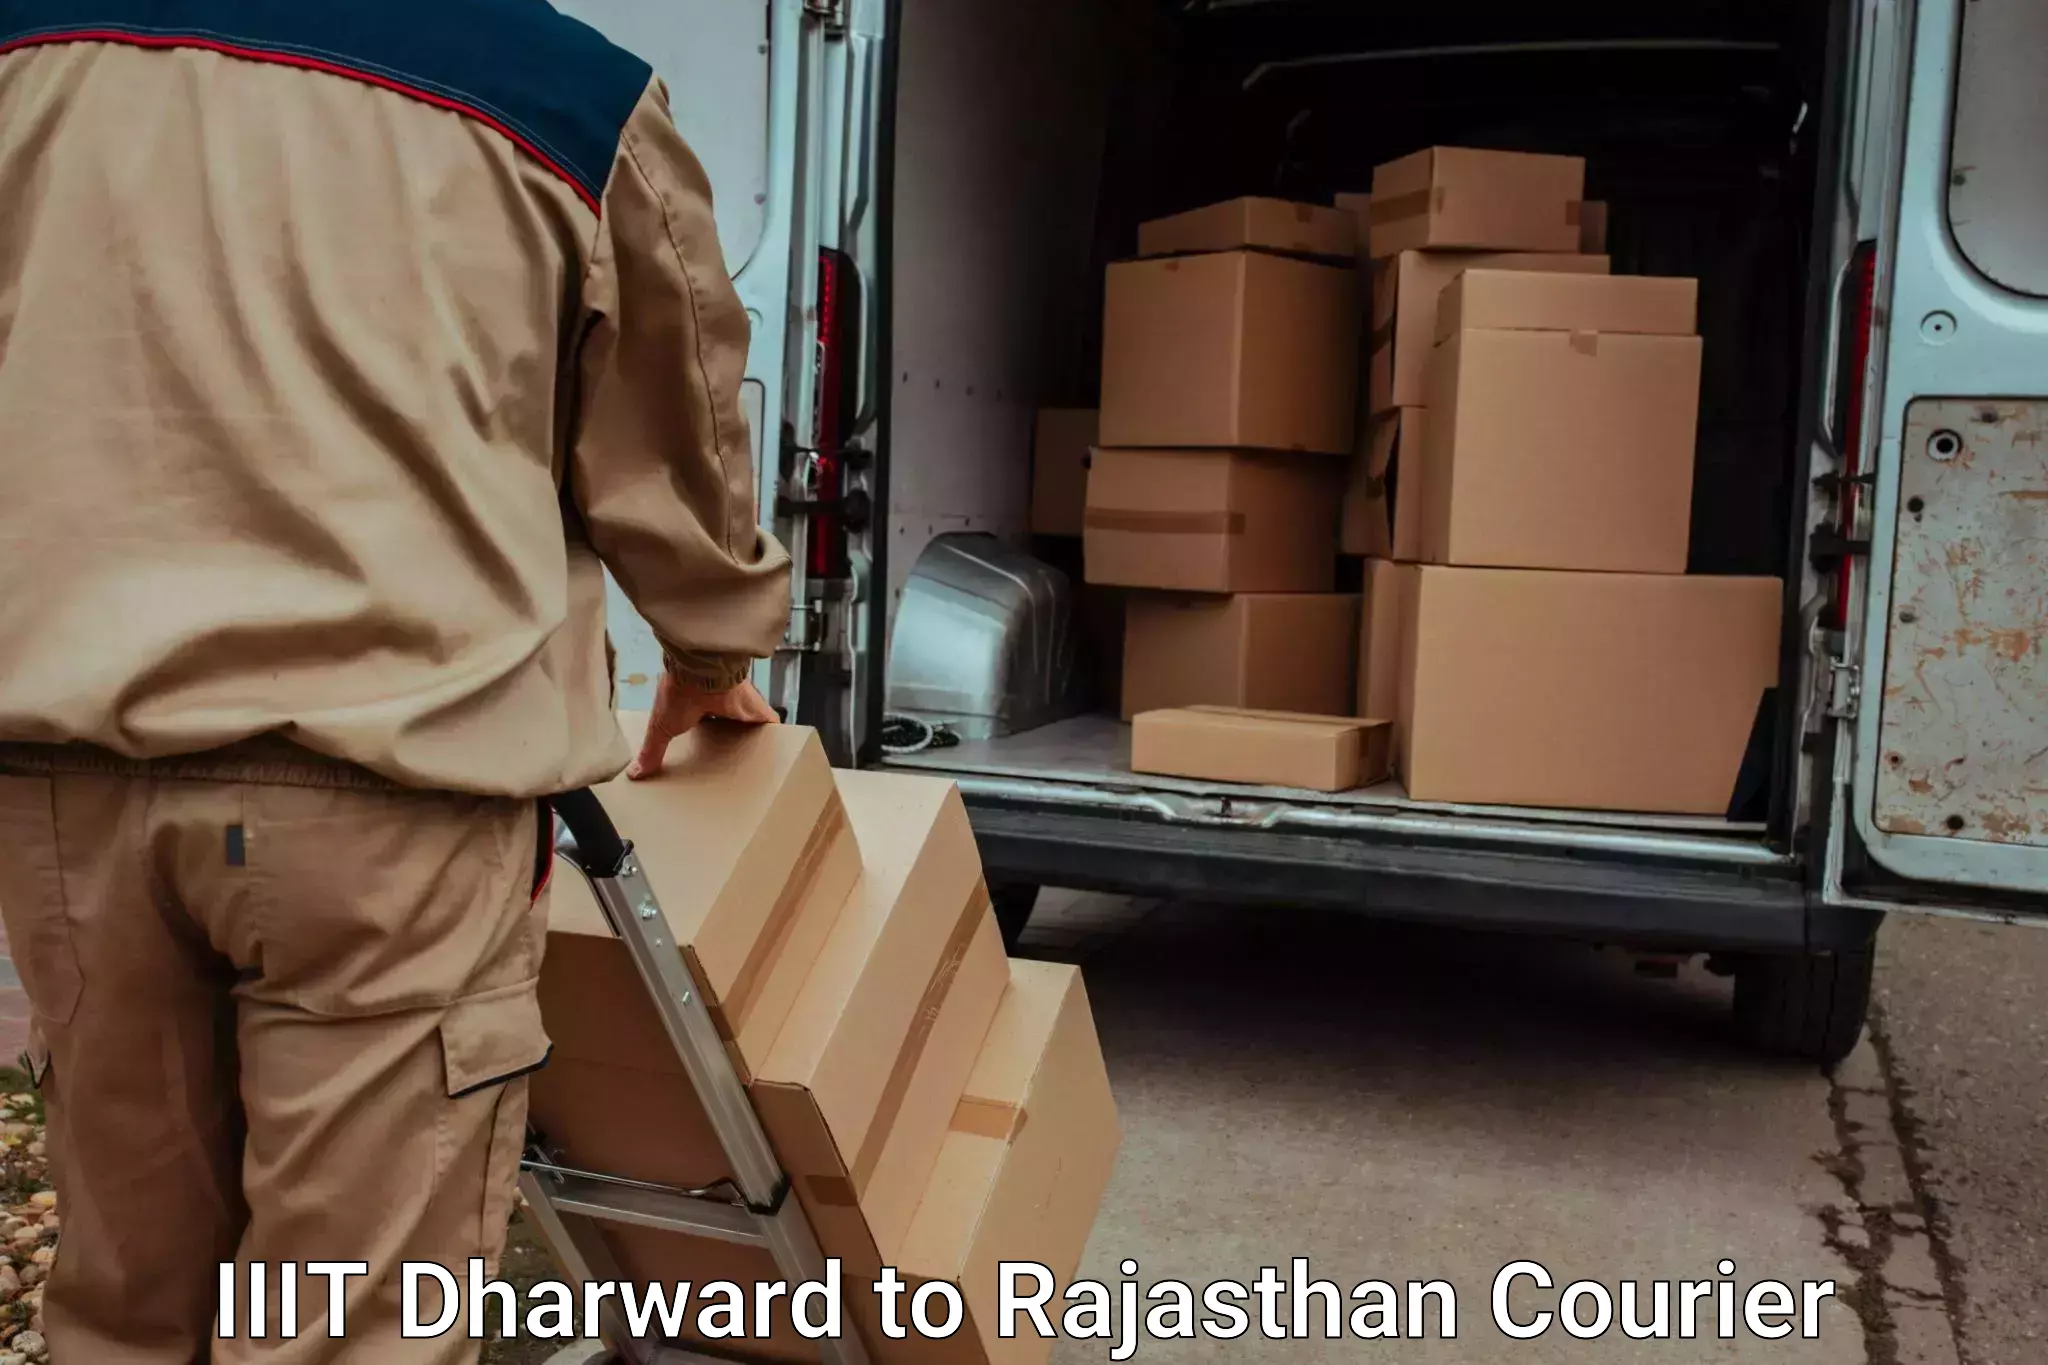 Personal effects shipping IIIT Dharward to Rajasthan